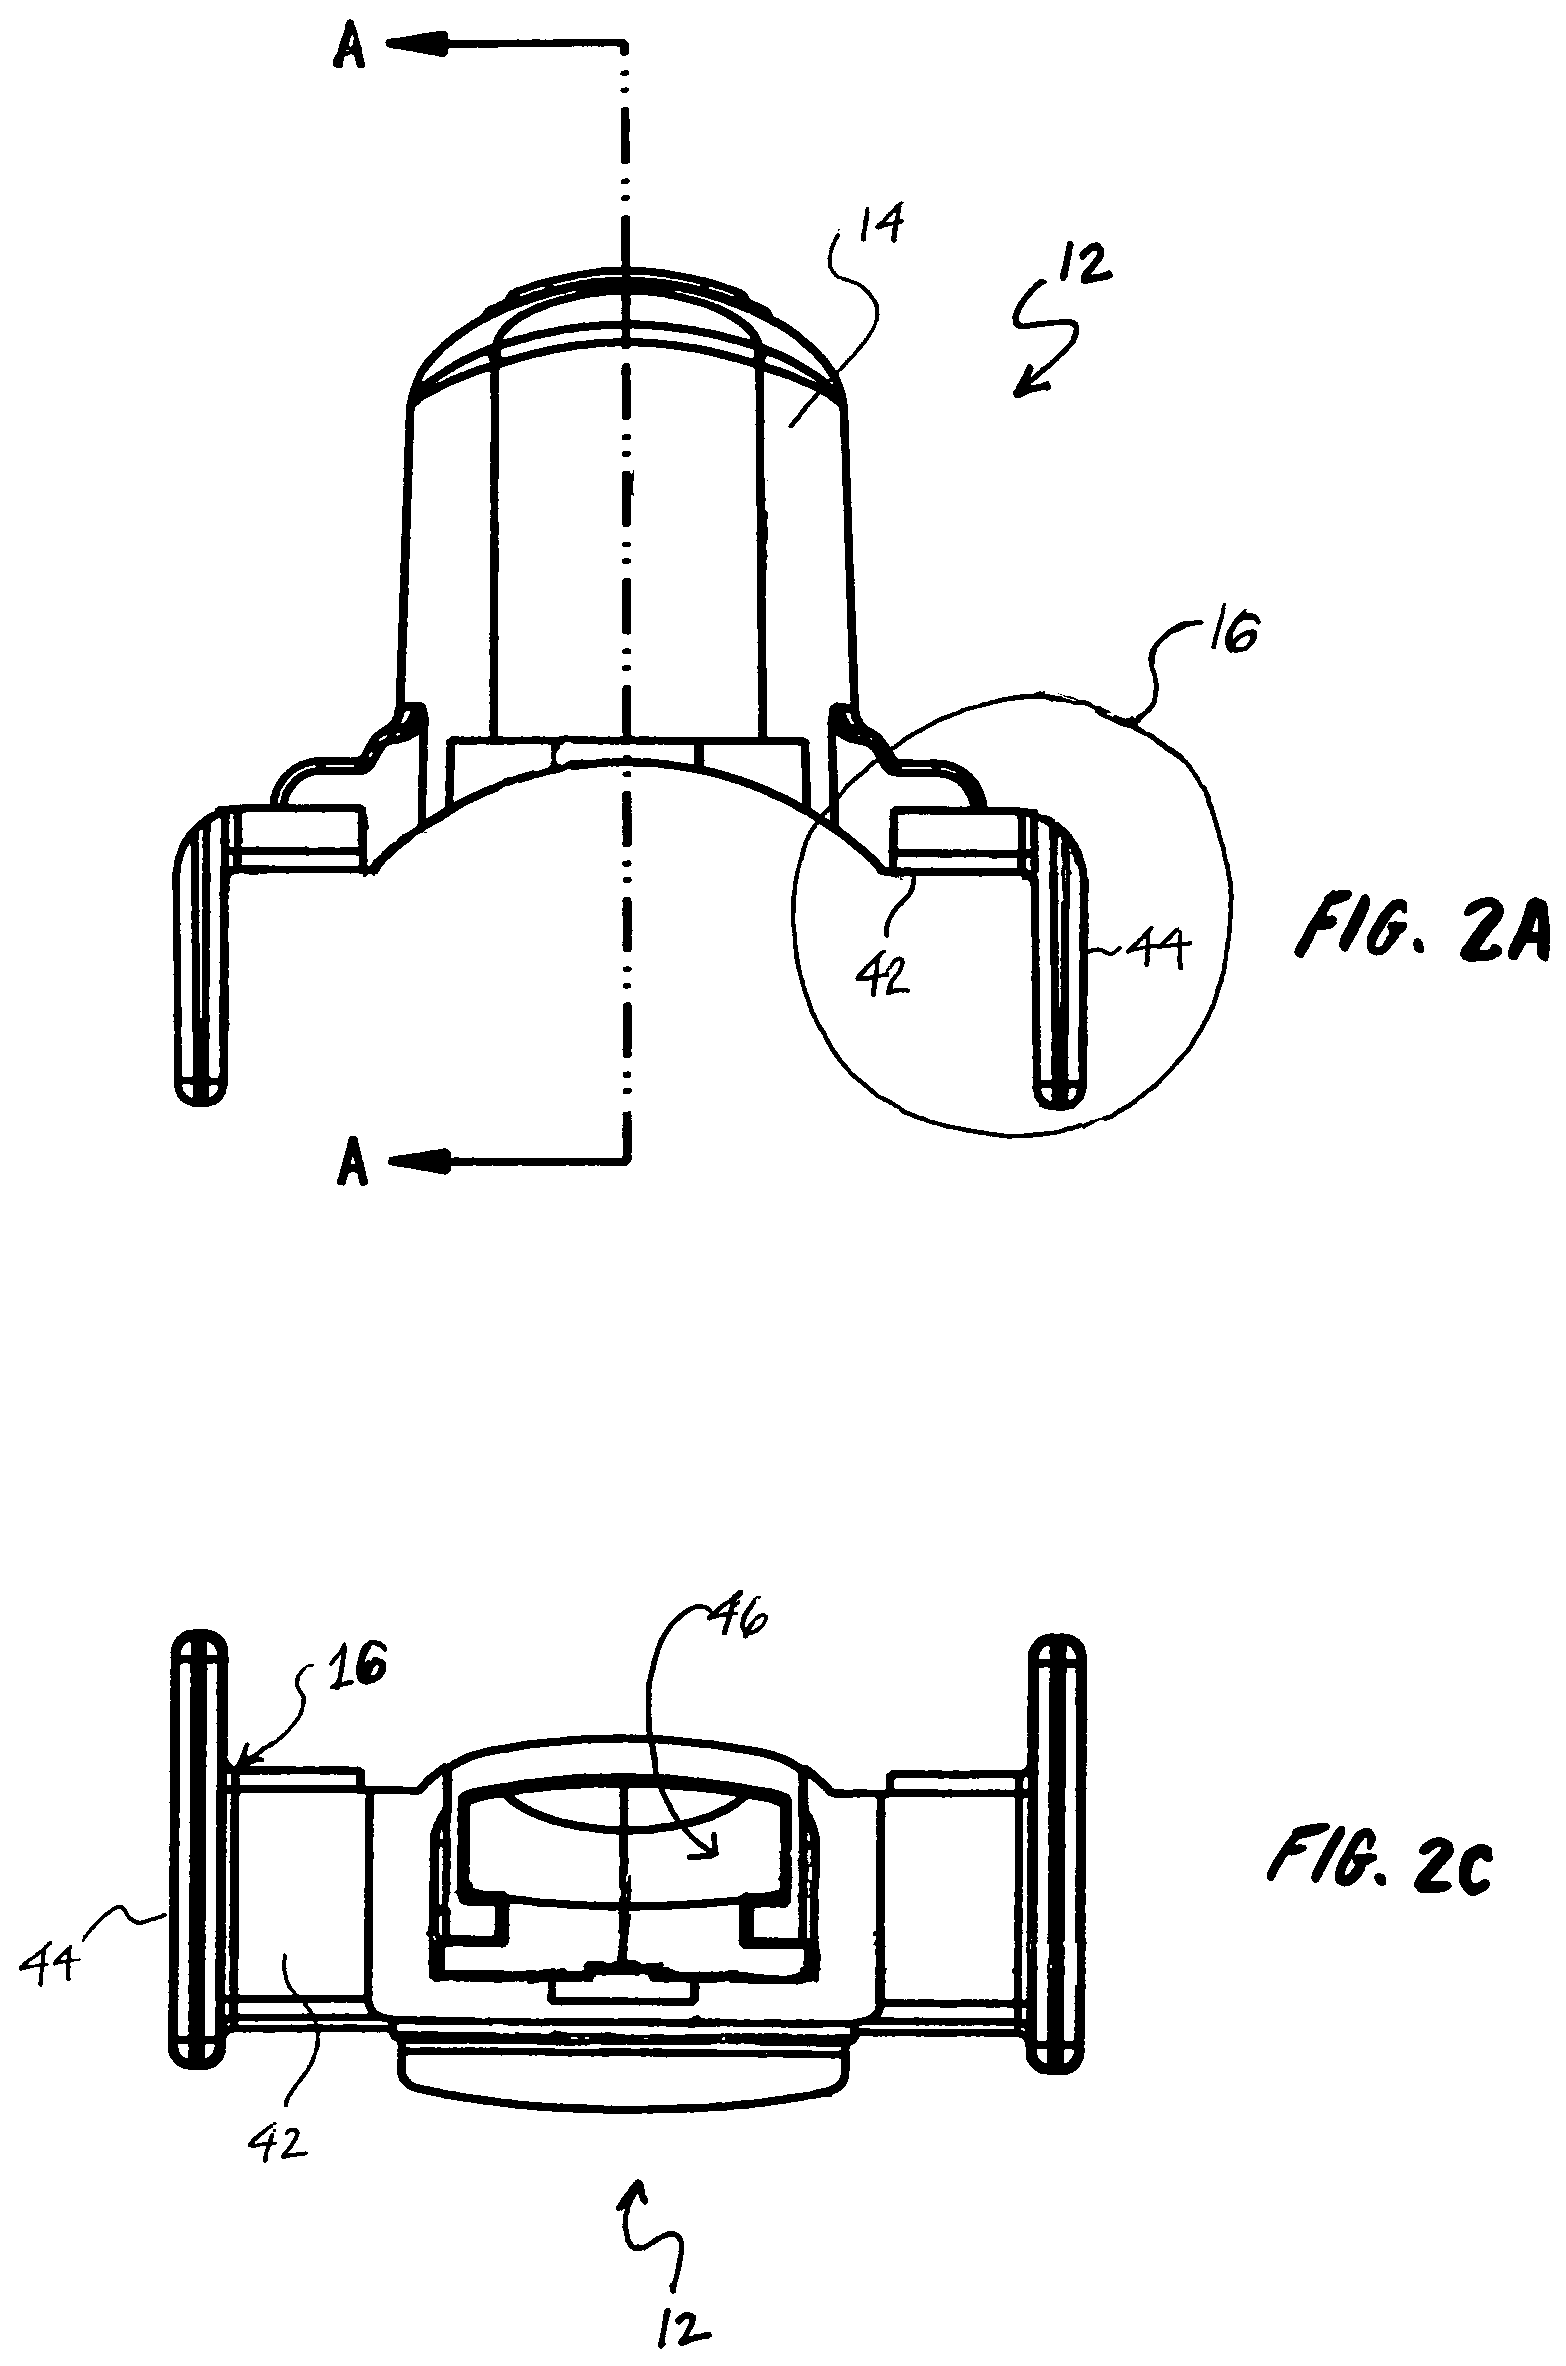 Manually manipulable actuator mechanism having constrained range of motion